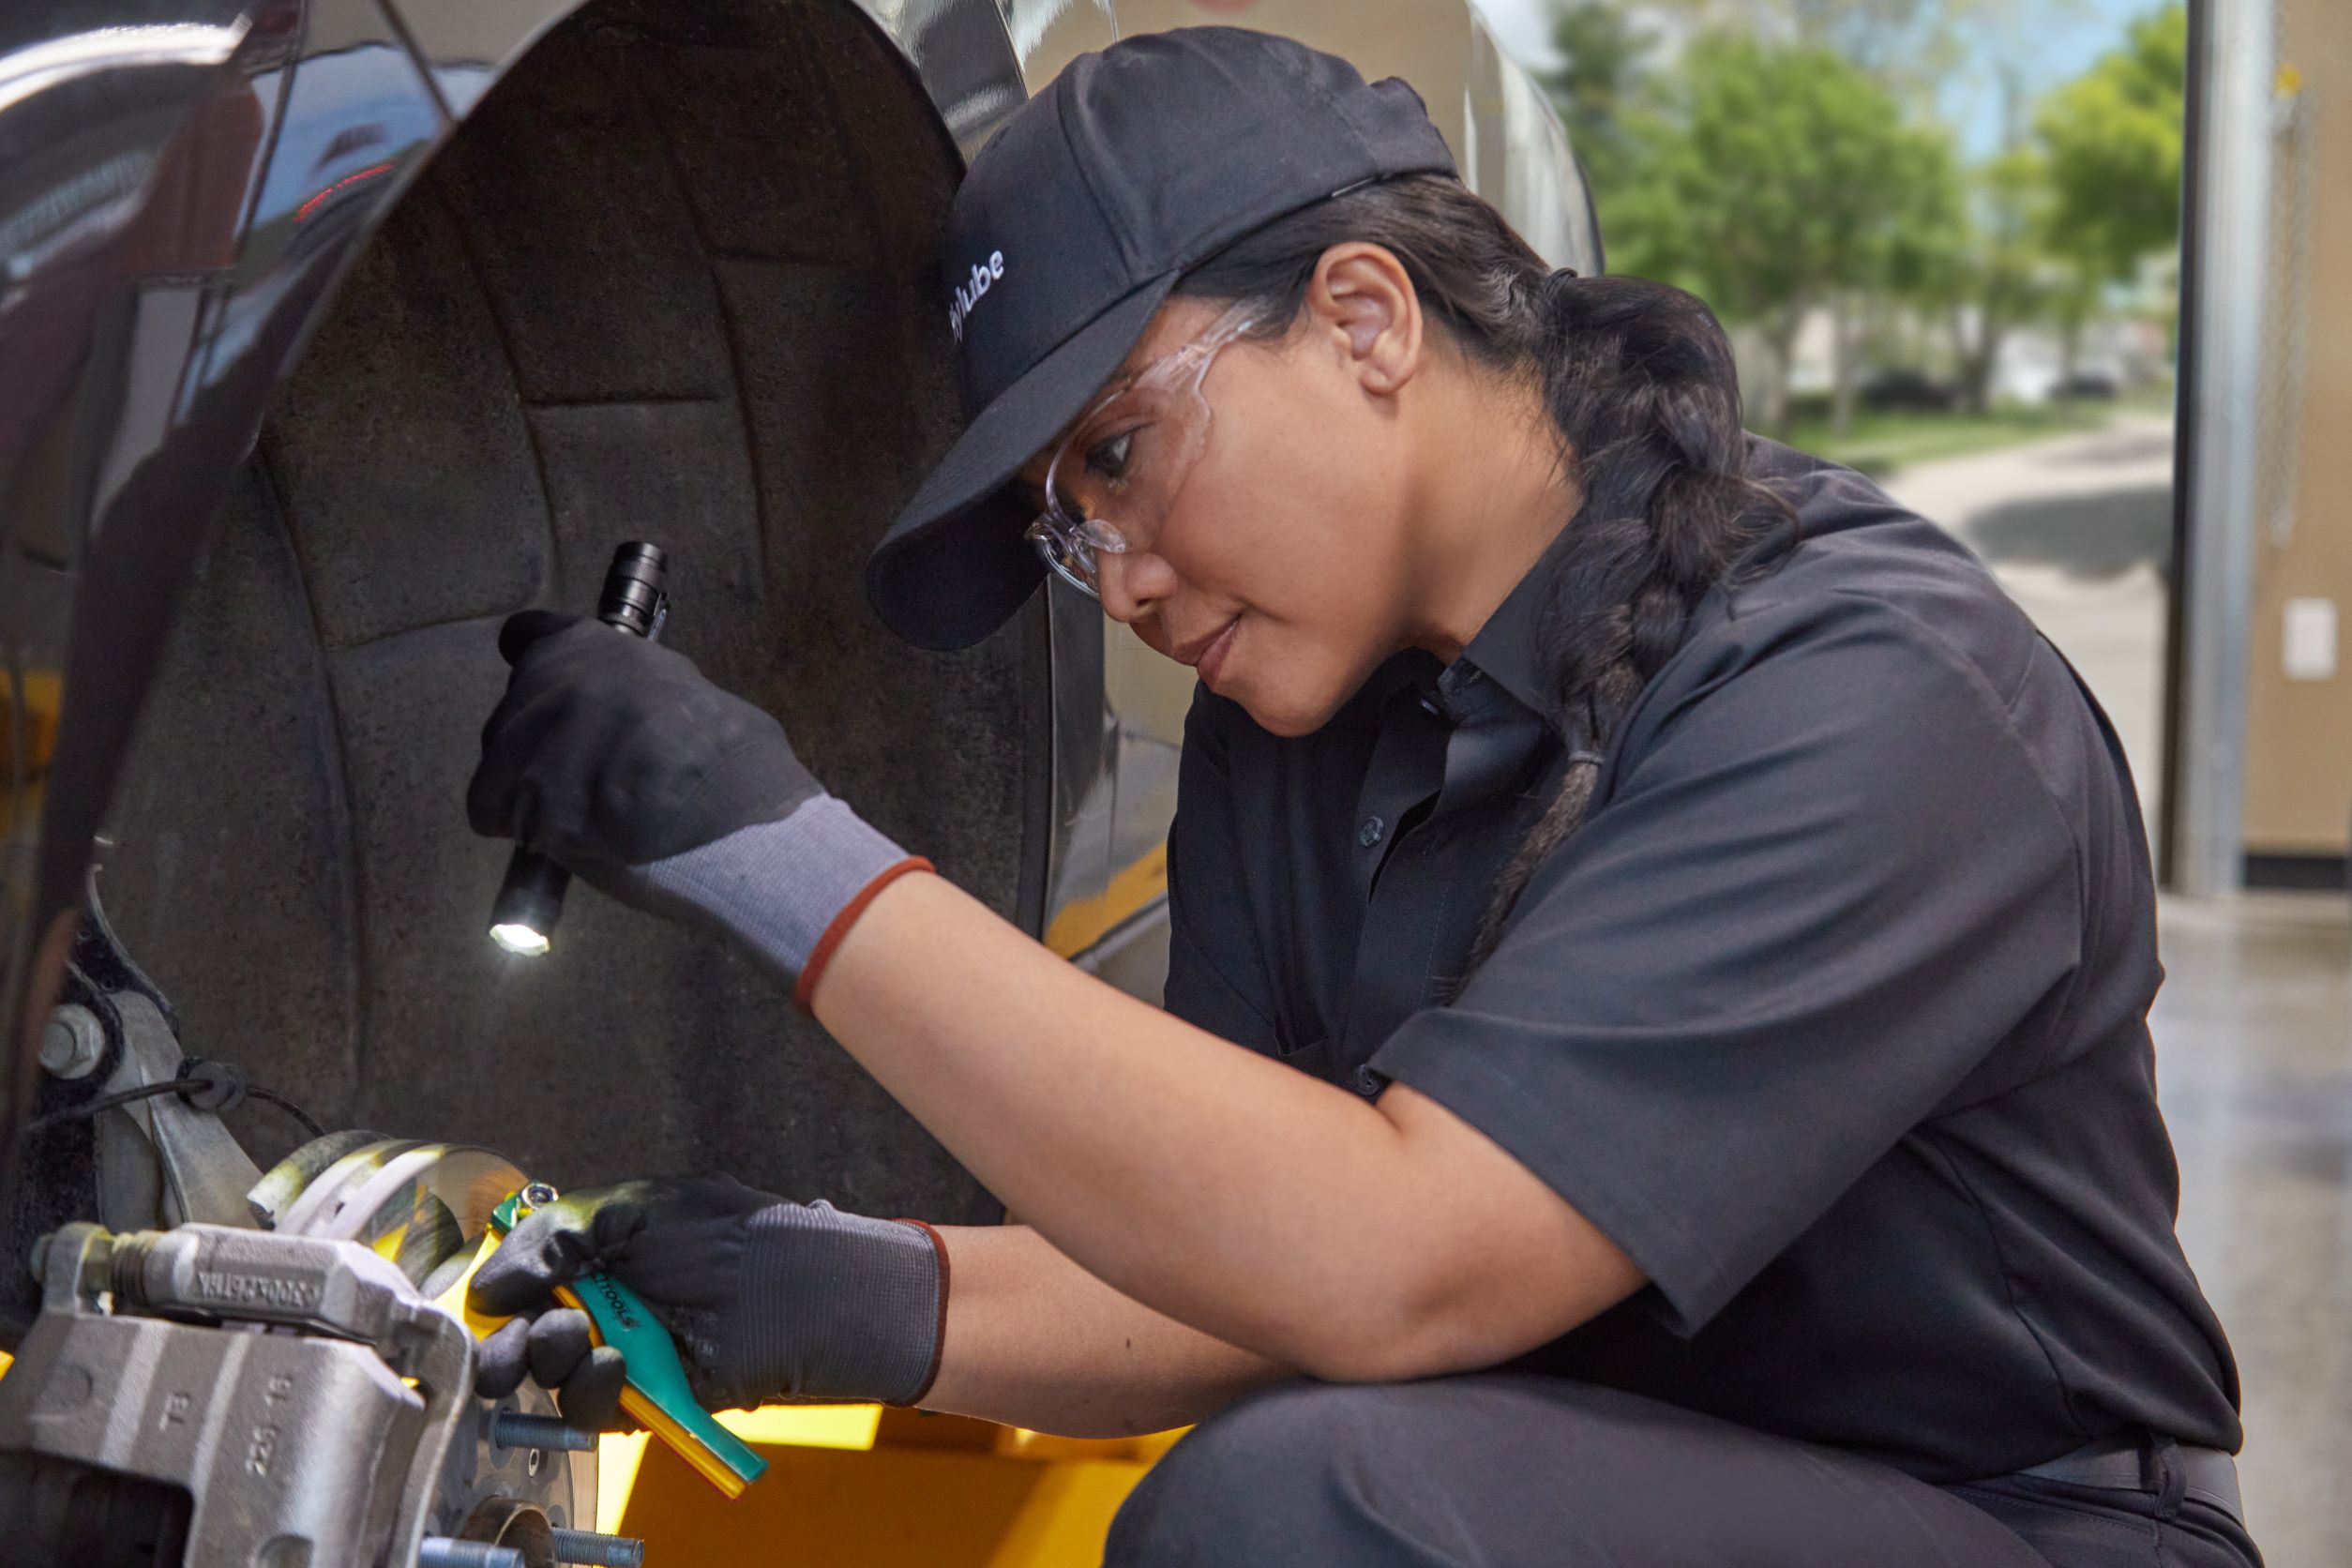 jiffy lube employee checking the disc brakes of a car